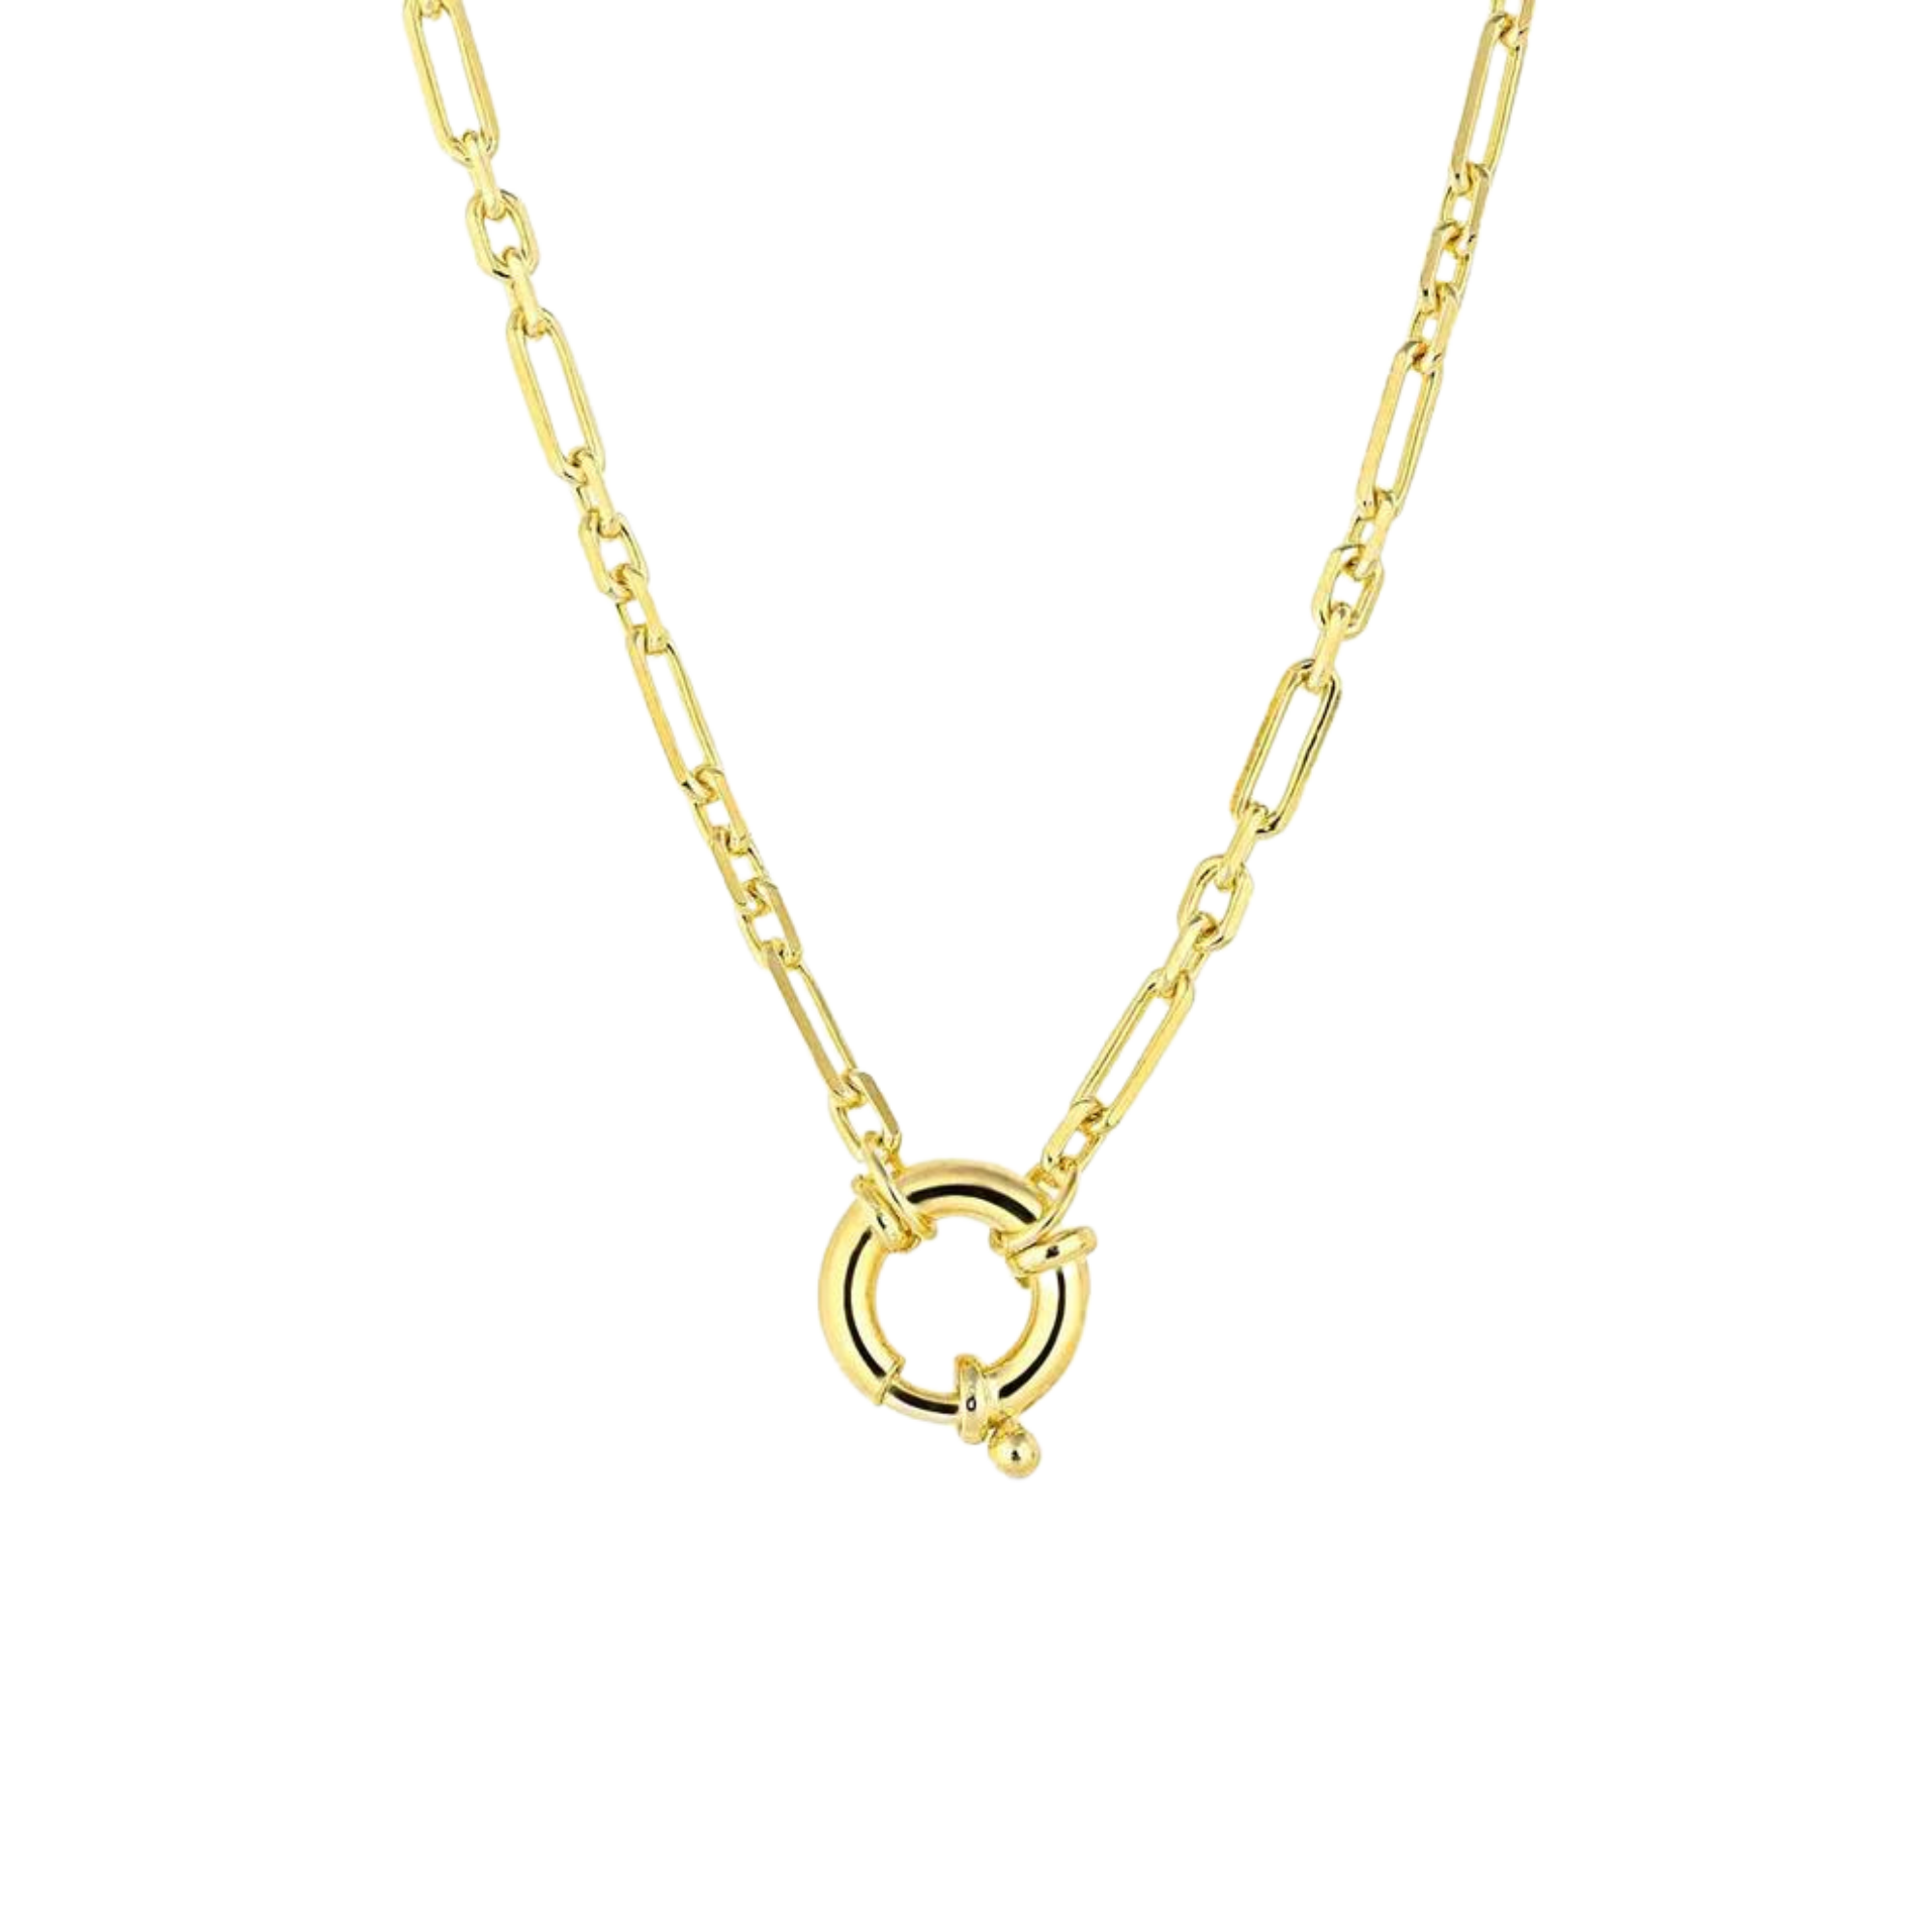 Large Lock Sterling Silver Chain Necklace